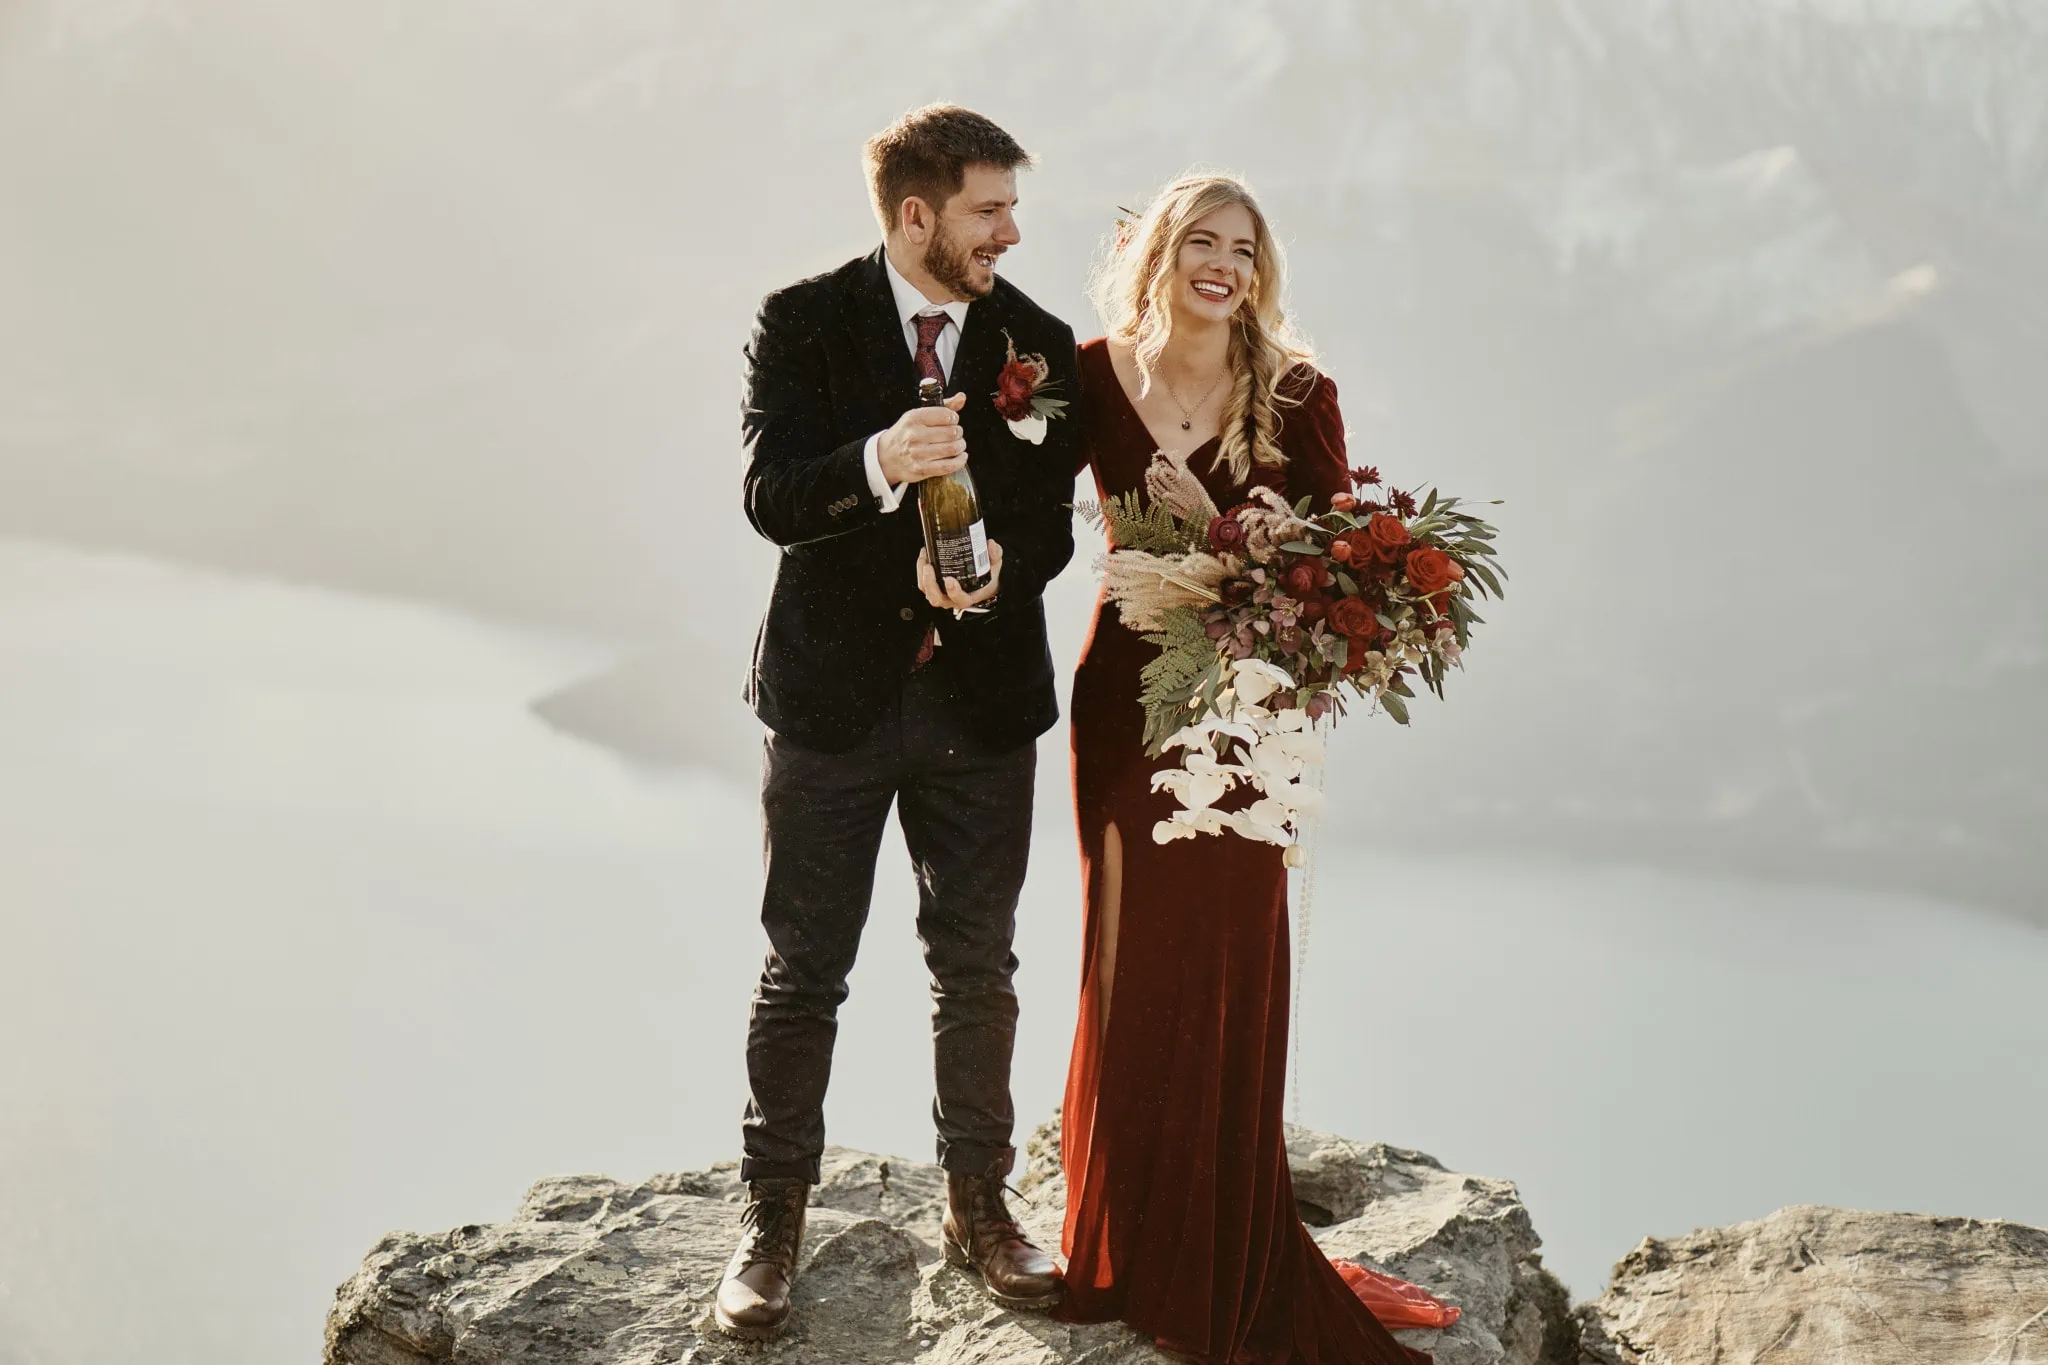 Claire and Rob celebrating their heli elopement wedding atop Cecil Peak with champagne.